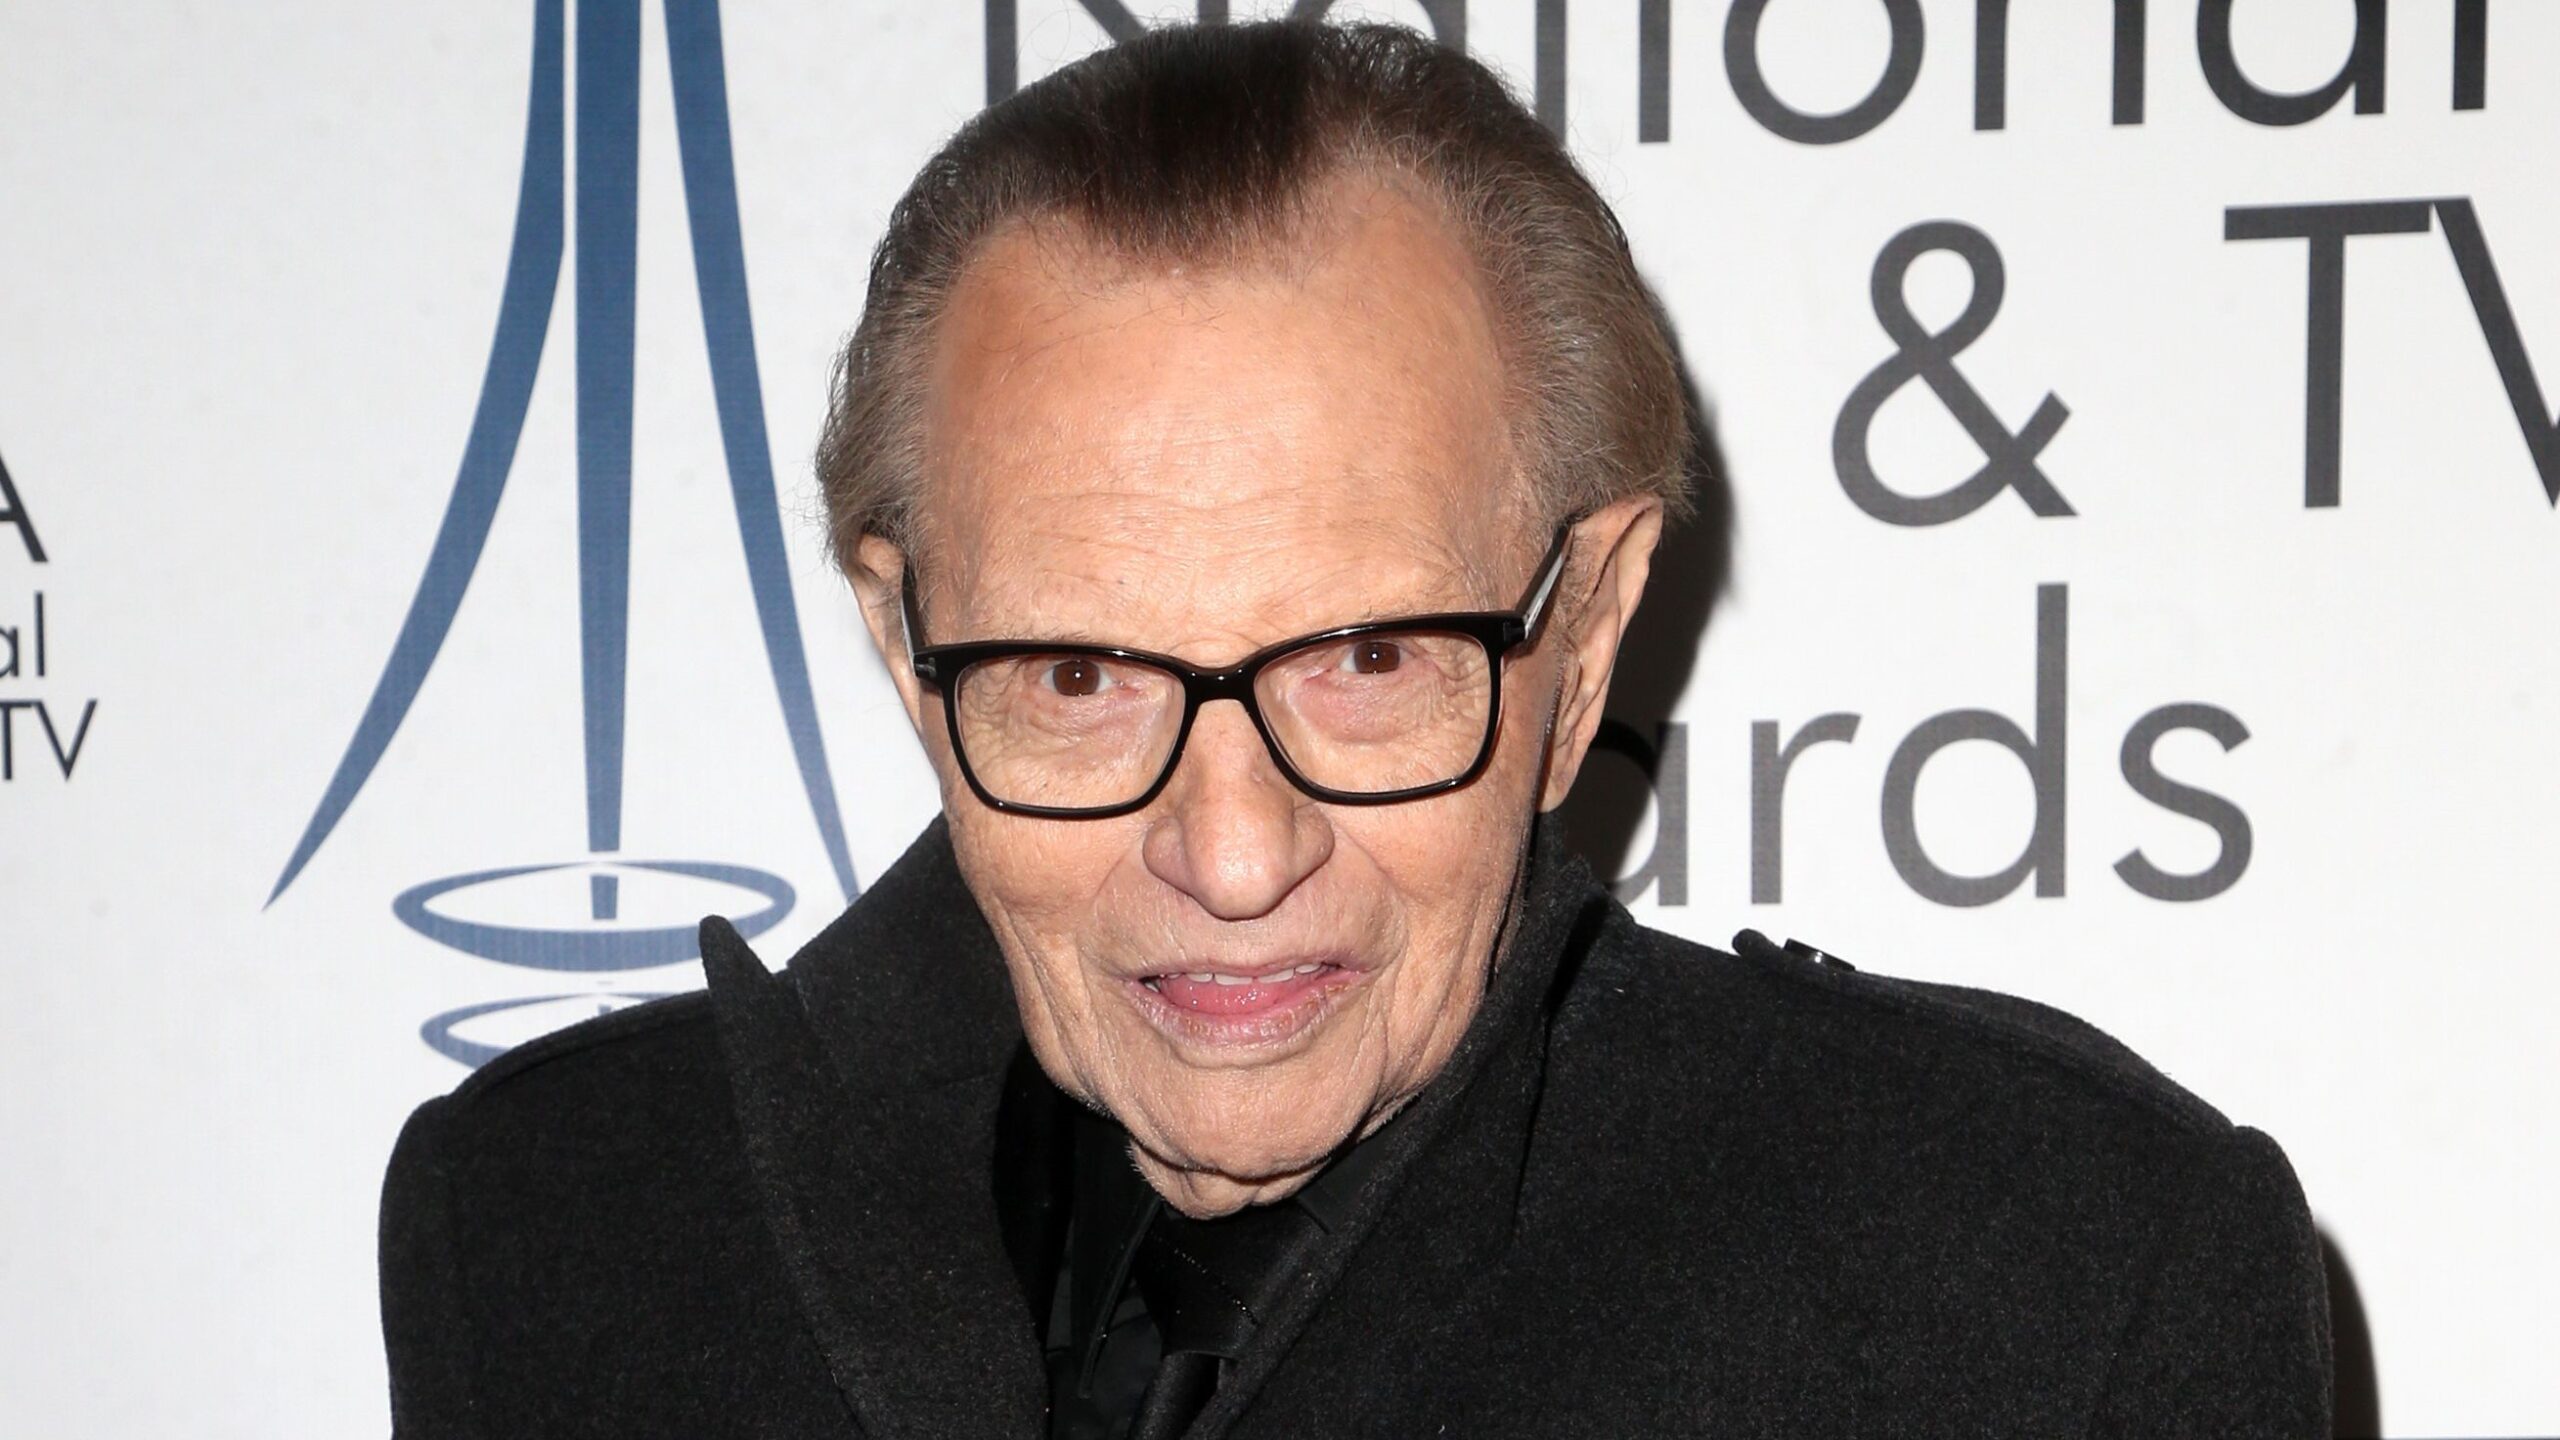 Larry King Transferred Out of ICU Following COVID-19 Hospitalization